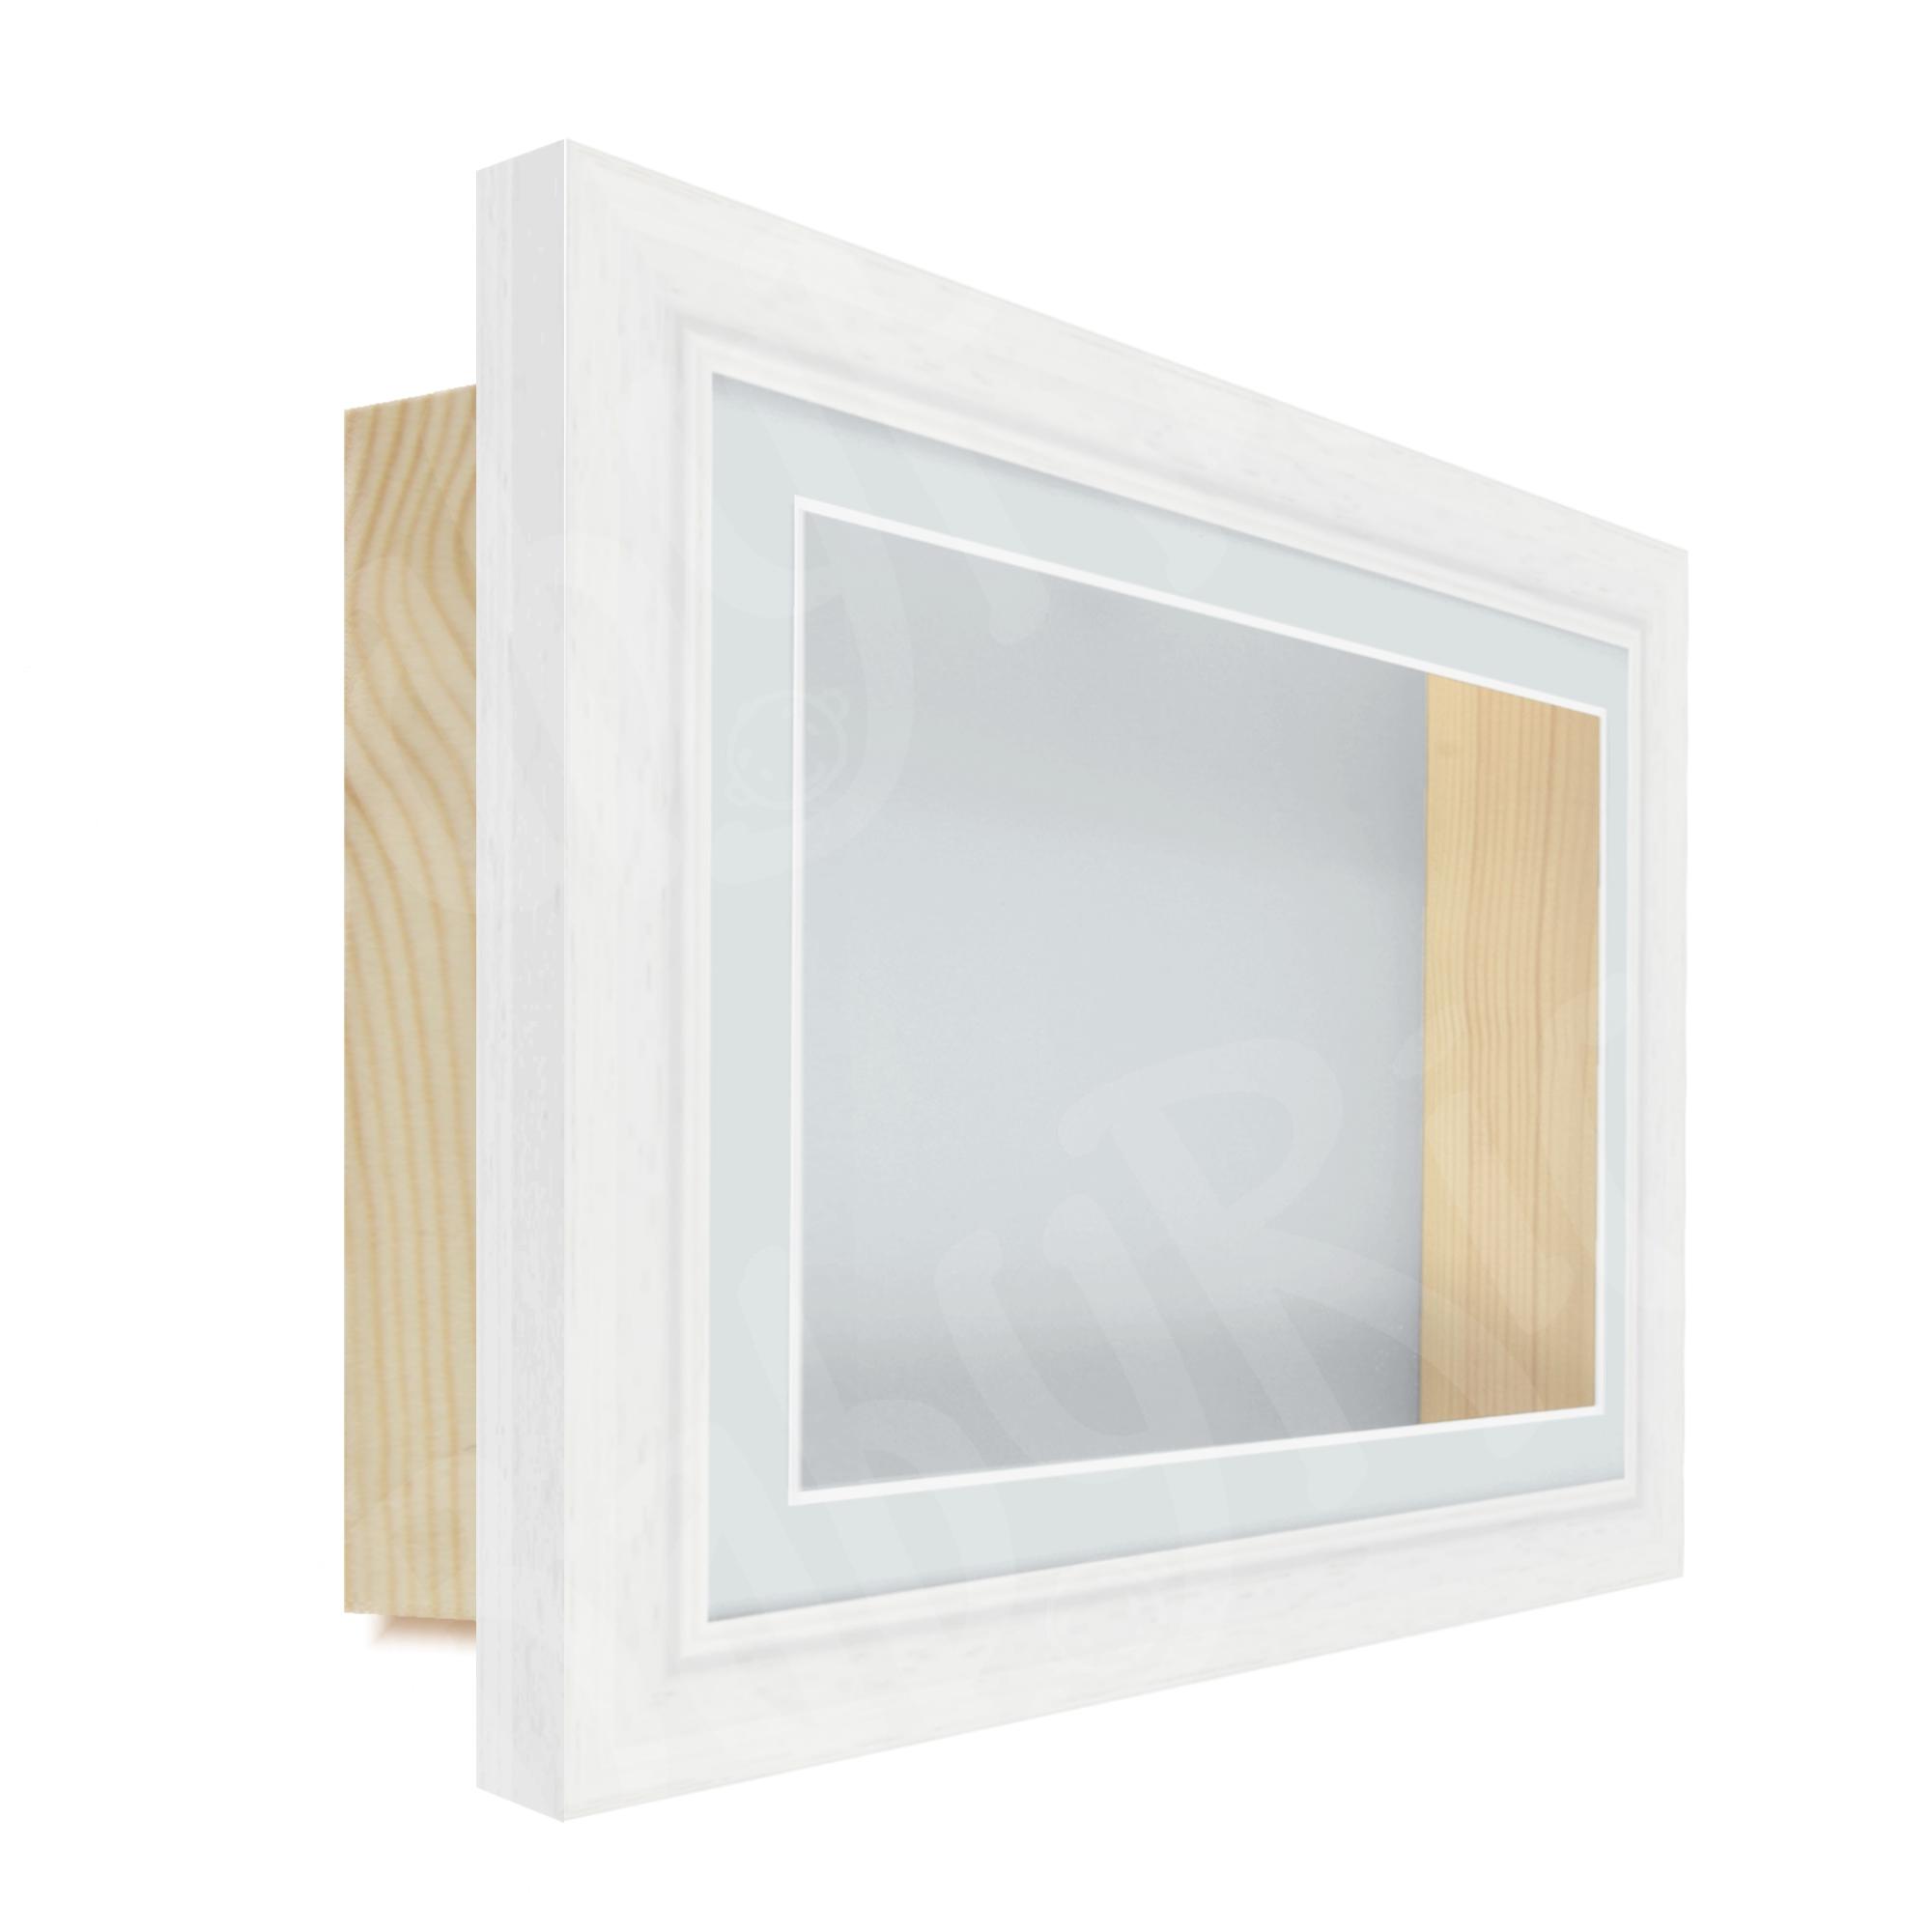 White Wooden Extra Deep Box Object Display Frame